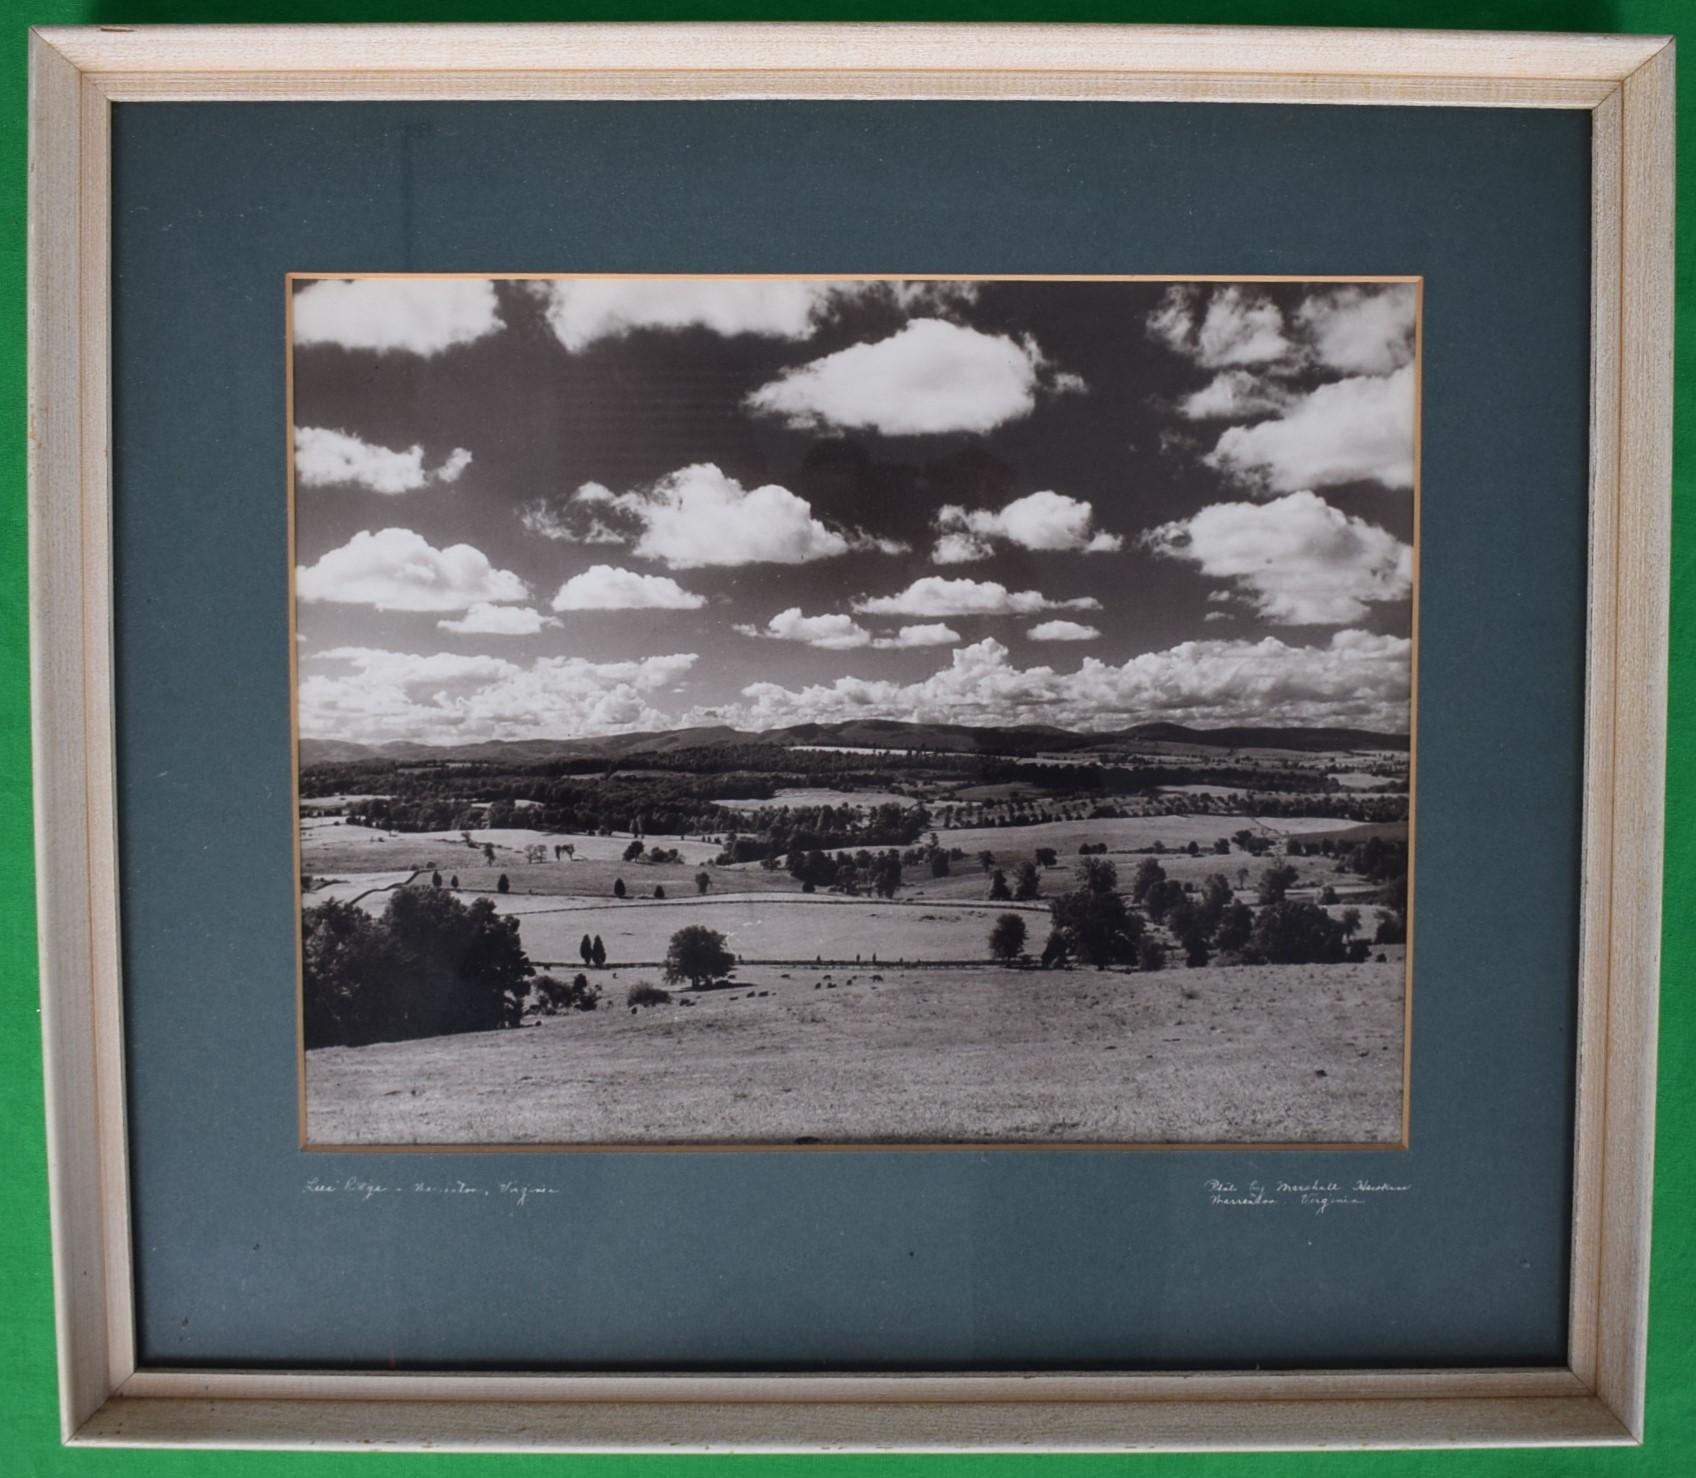 Photo Sz: 10 1/2"H x 13 1/2"W

Frame Sz: 17"H x 19 1/4"W

Shot by Marshall Hawkins Warrenton, Virginia

Marshall P. Hawkins (1910-1988) was a Warrenton photographer who had specialized in pictures of horses, horse shows, hunts and races for almost